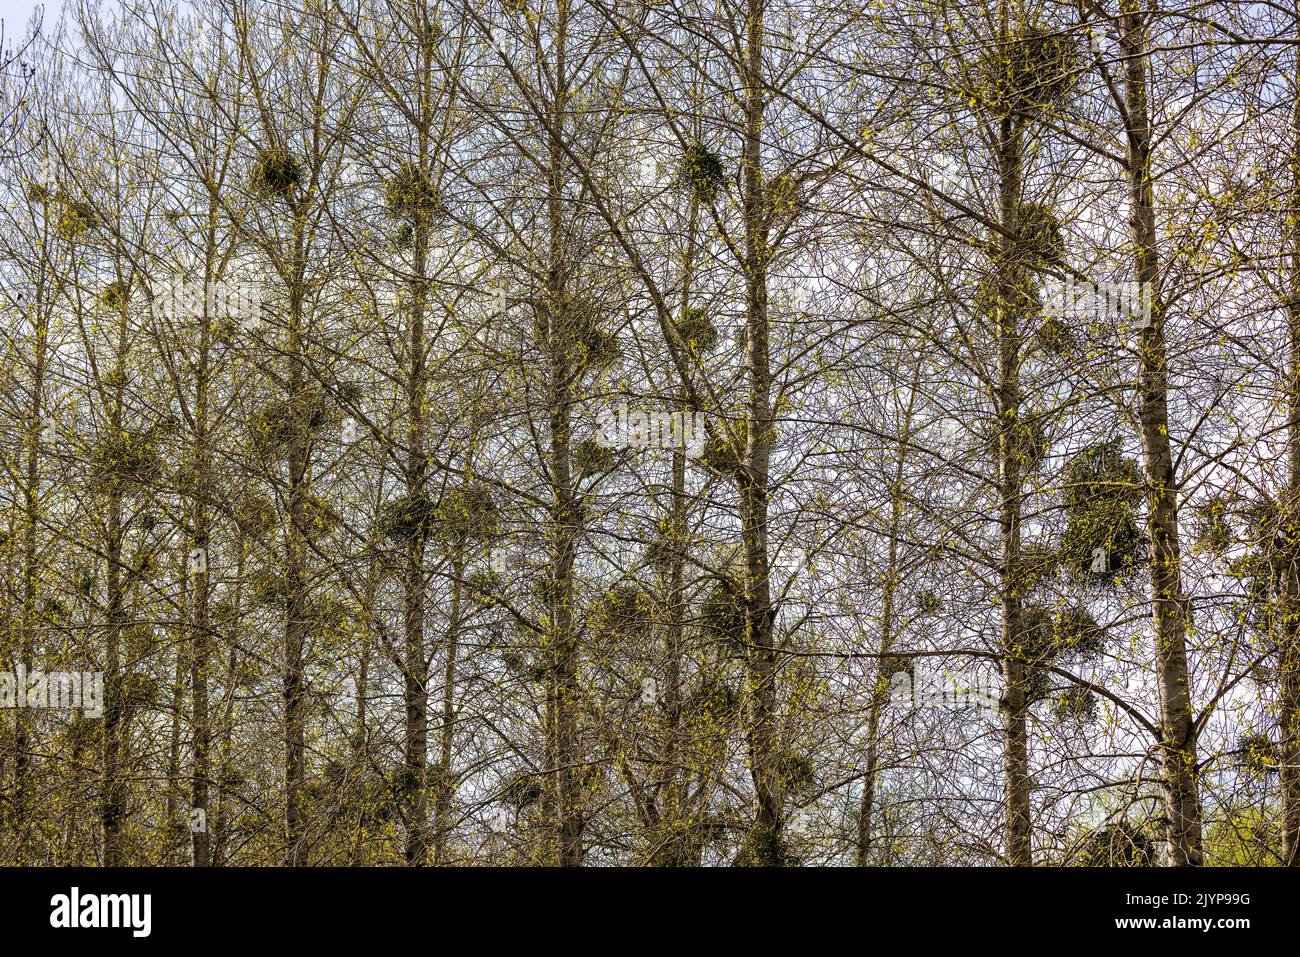 Trees covered with mistletoe in spring, Somme, France Stock Photo